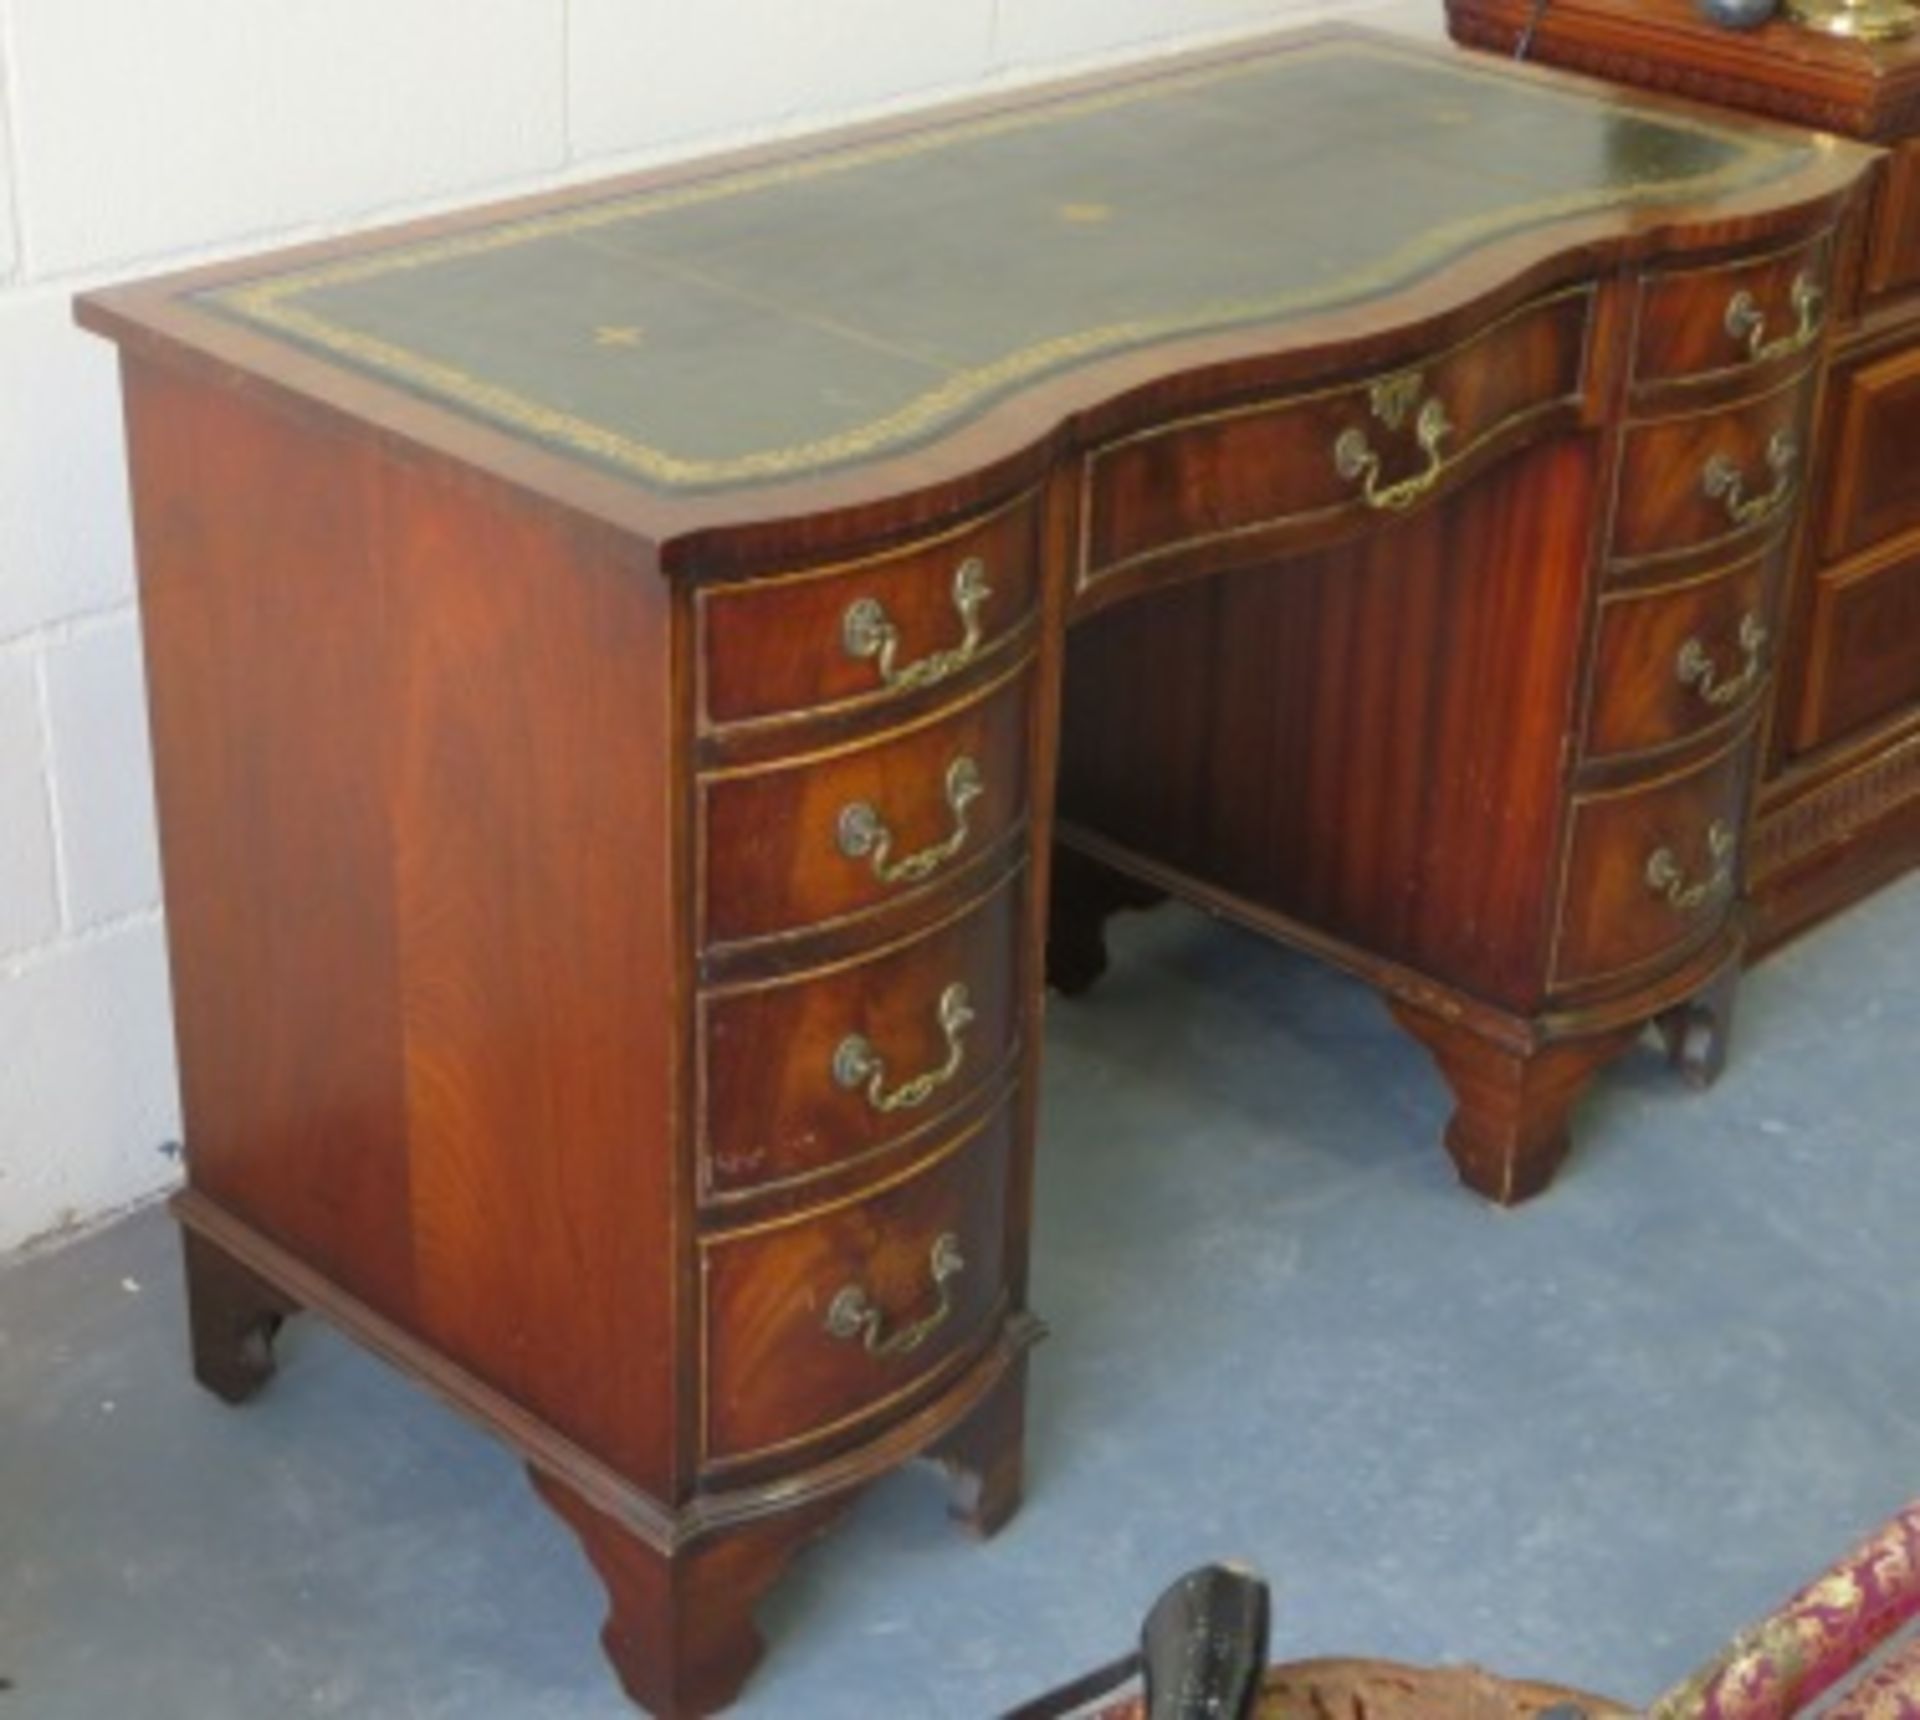 Antique Mahogany Leather Inlaid Desk With 9 Drawers - Image 3 of 3